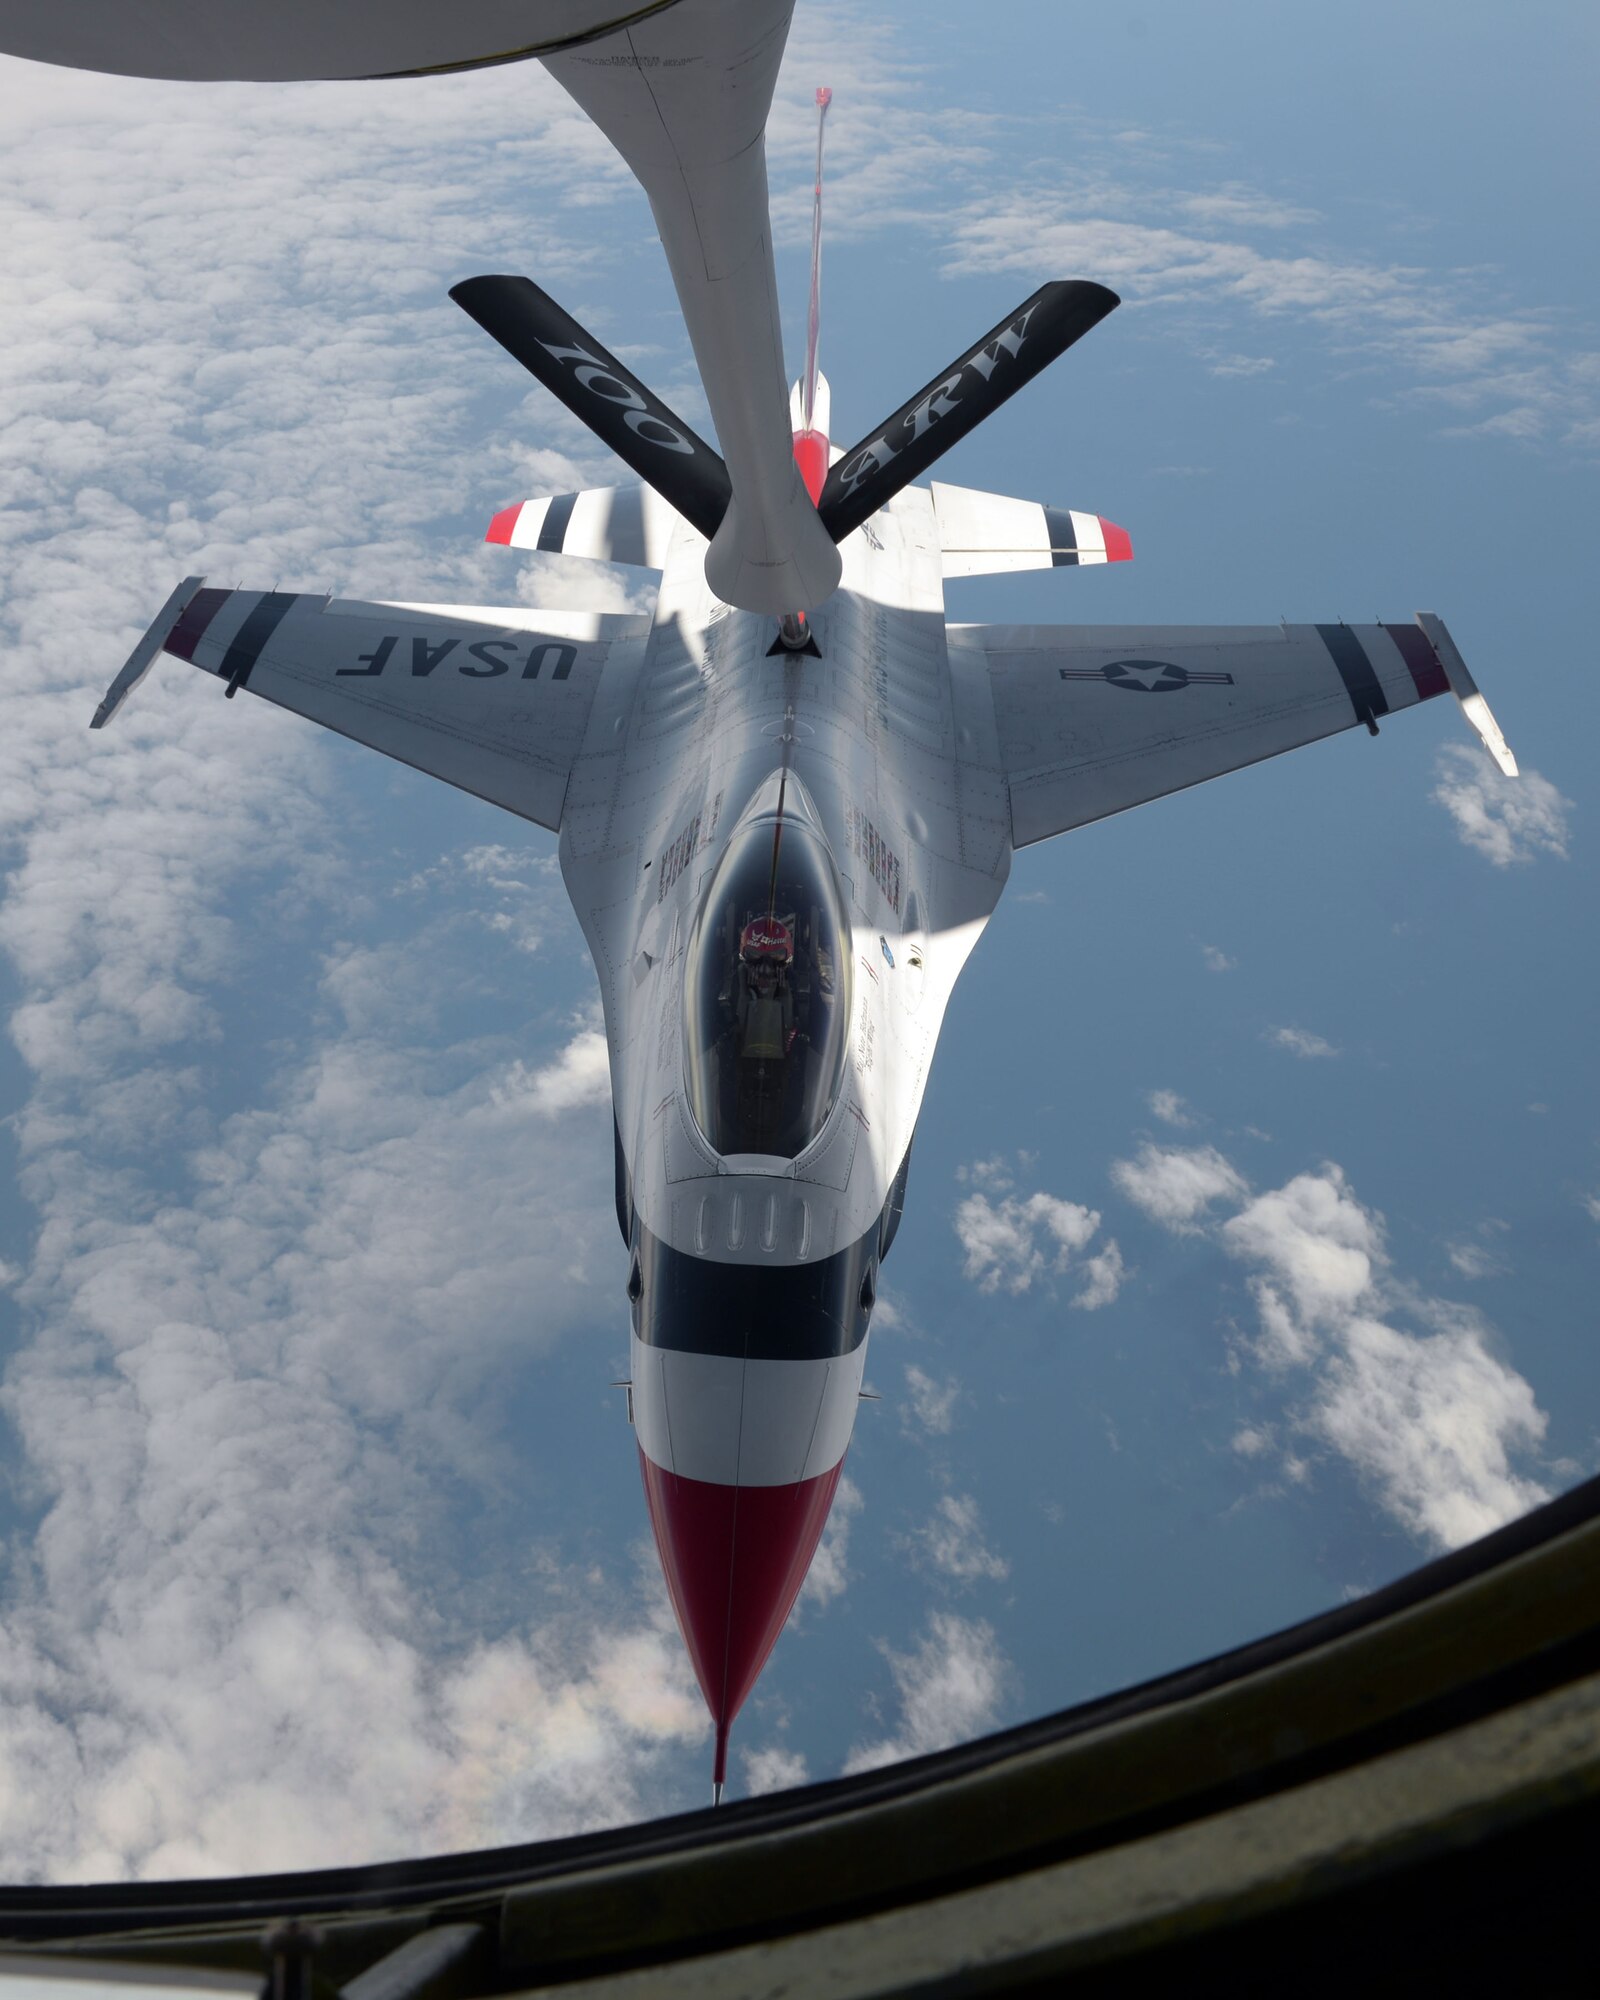 A U.S. Air Force Thunderbird receives fuel from a KC-135 Stratotanker assigned to the 100th Air Refueling Wing over the Isle of Skye, Scotland, July 10, 2017.  The Thunderbirds rehearsed their routines in preparation for the 2017 Royal International Air Tattoo airshow. (U.S. Air Force photo by Airman 1st Class Benjamin Cooper)